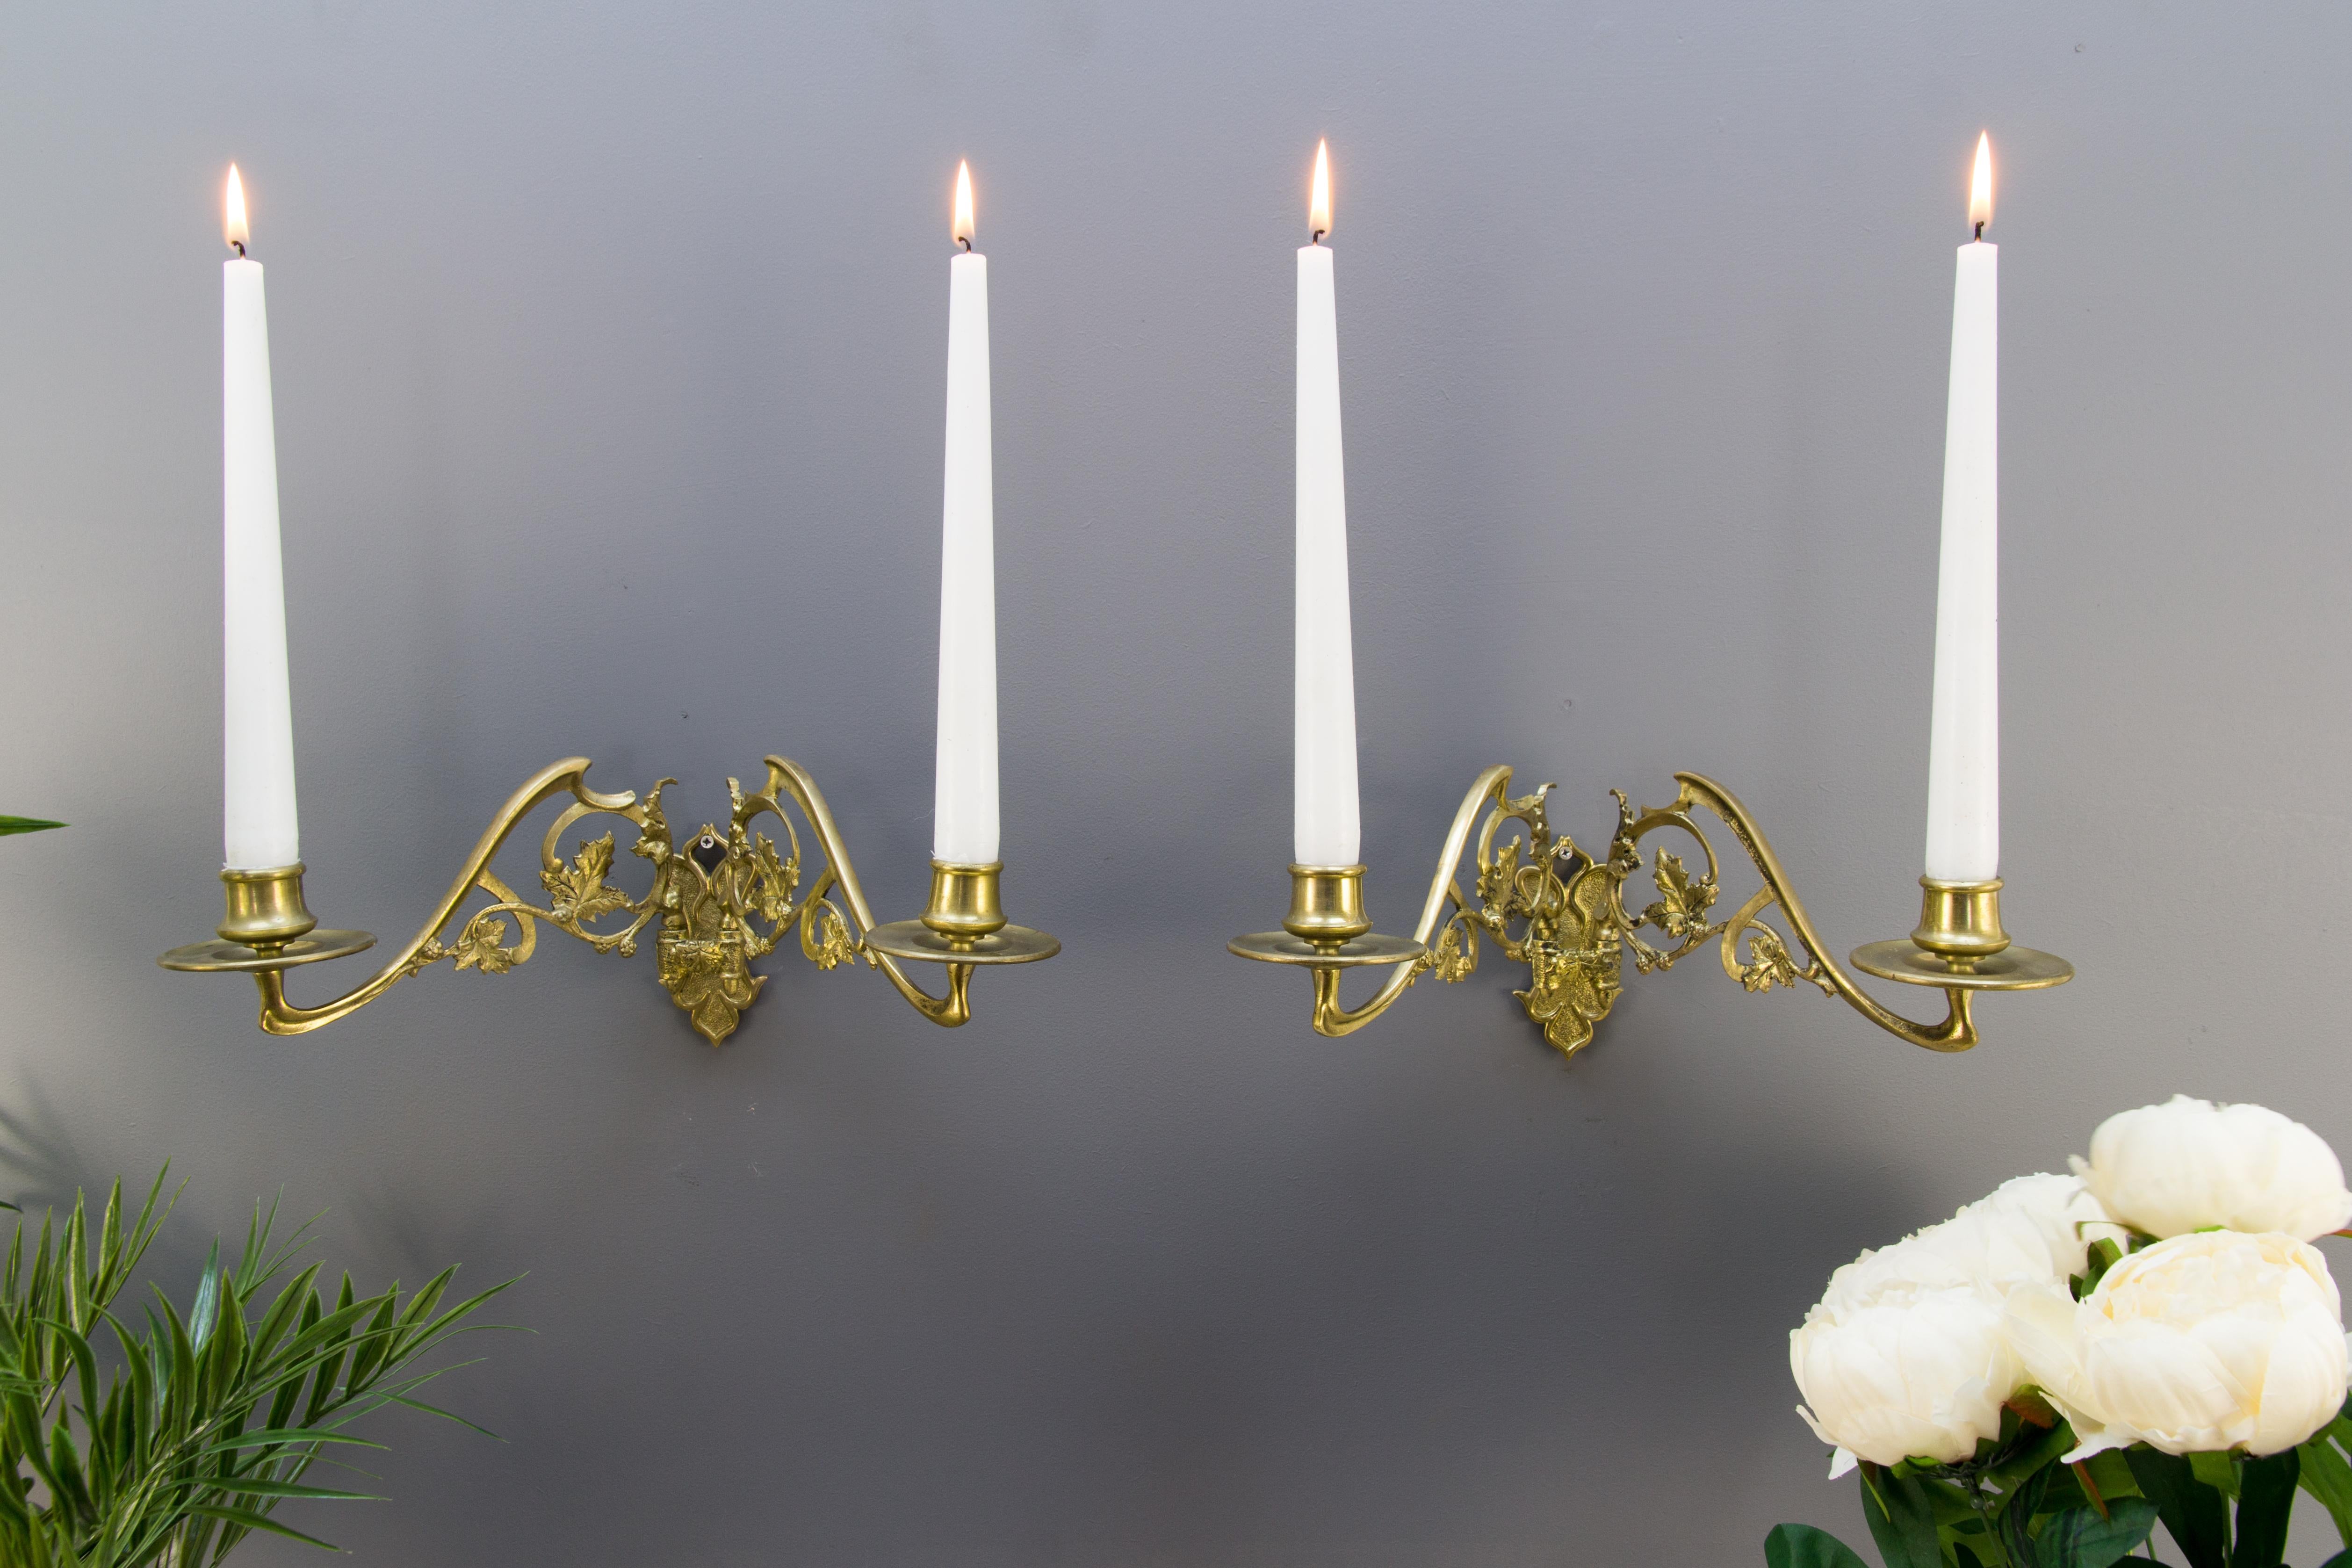 A pair of Art Nouveau ornate piano or wall sconces, candle holders by E. Muller with beautiful leaf decors. Each sconce has two arms. Marked E. Muller Depose Paris on the back side. France, 1920s.
Dimensions: Height 13 cm / 5.11 in; width 42 cm /